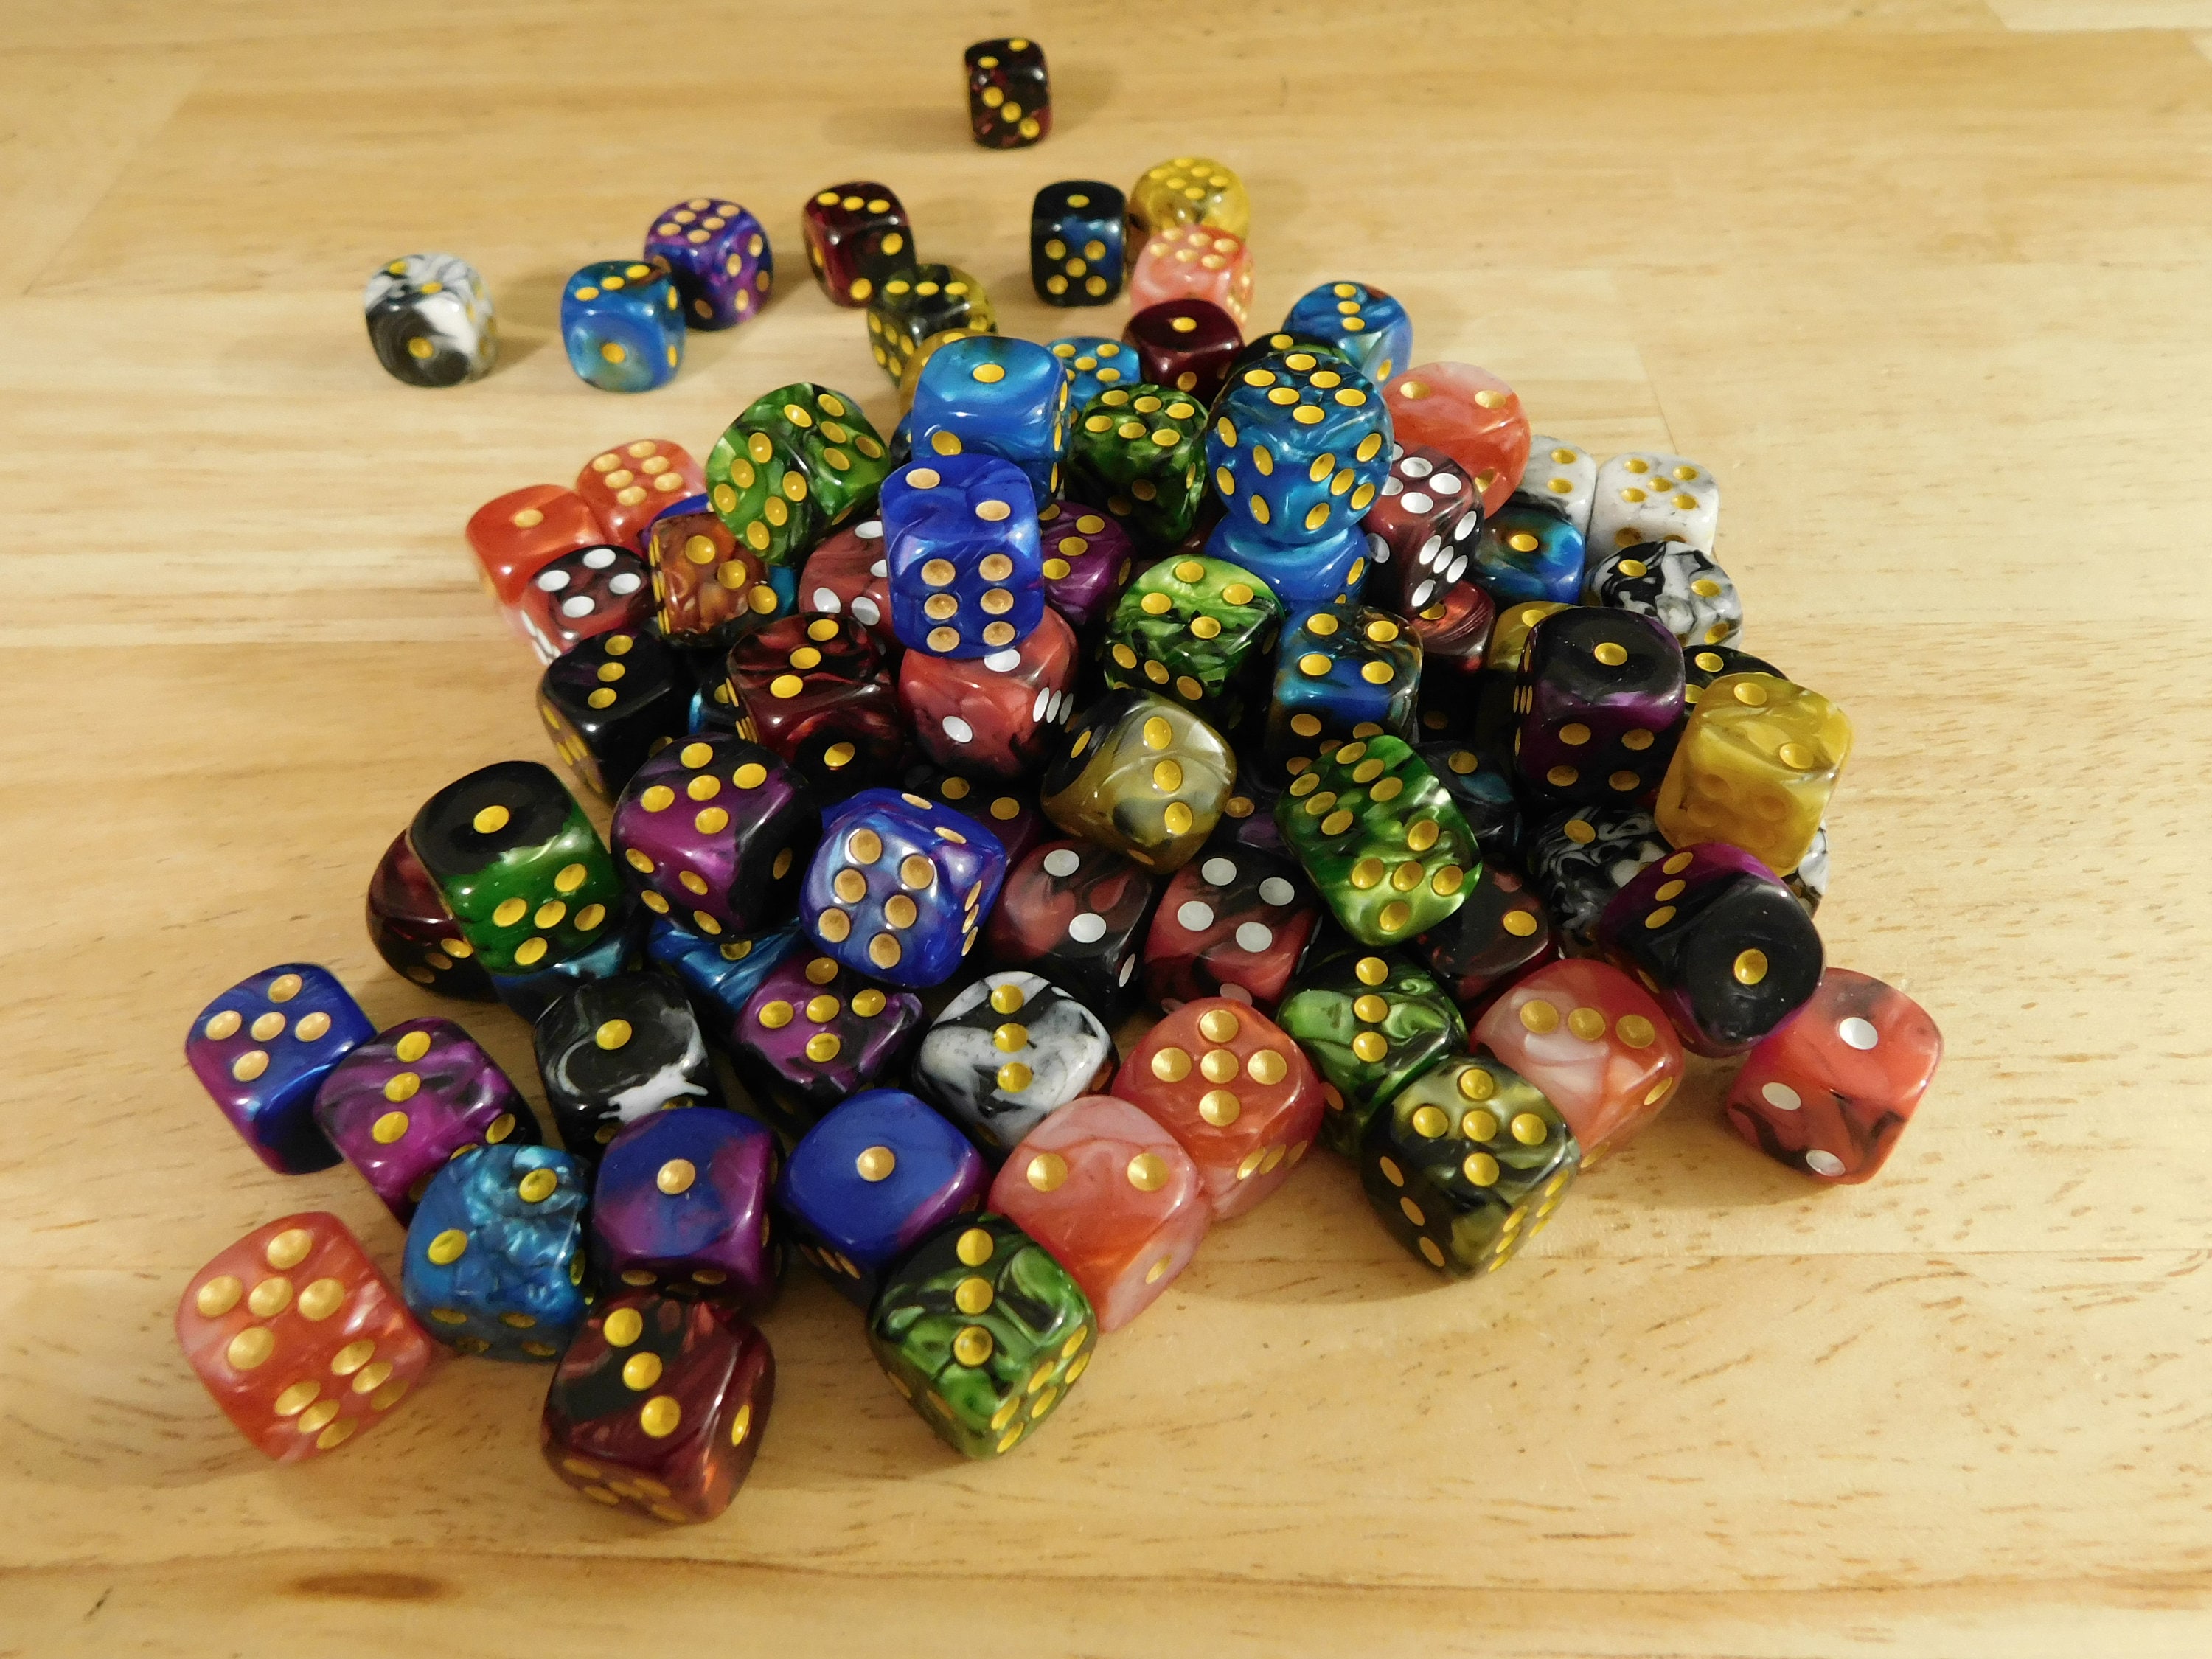 D4 - Acrylic Assorted Digit 4 Sided Dice x2 - Bigger Worlds Games